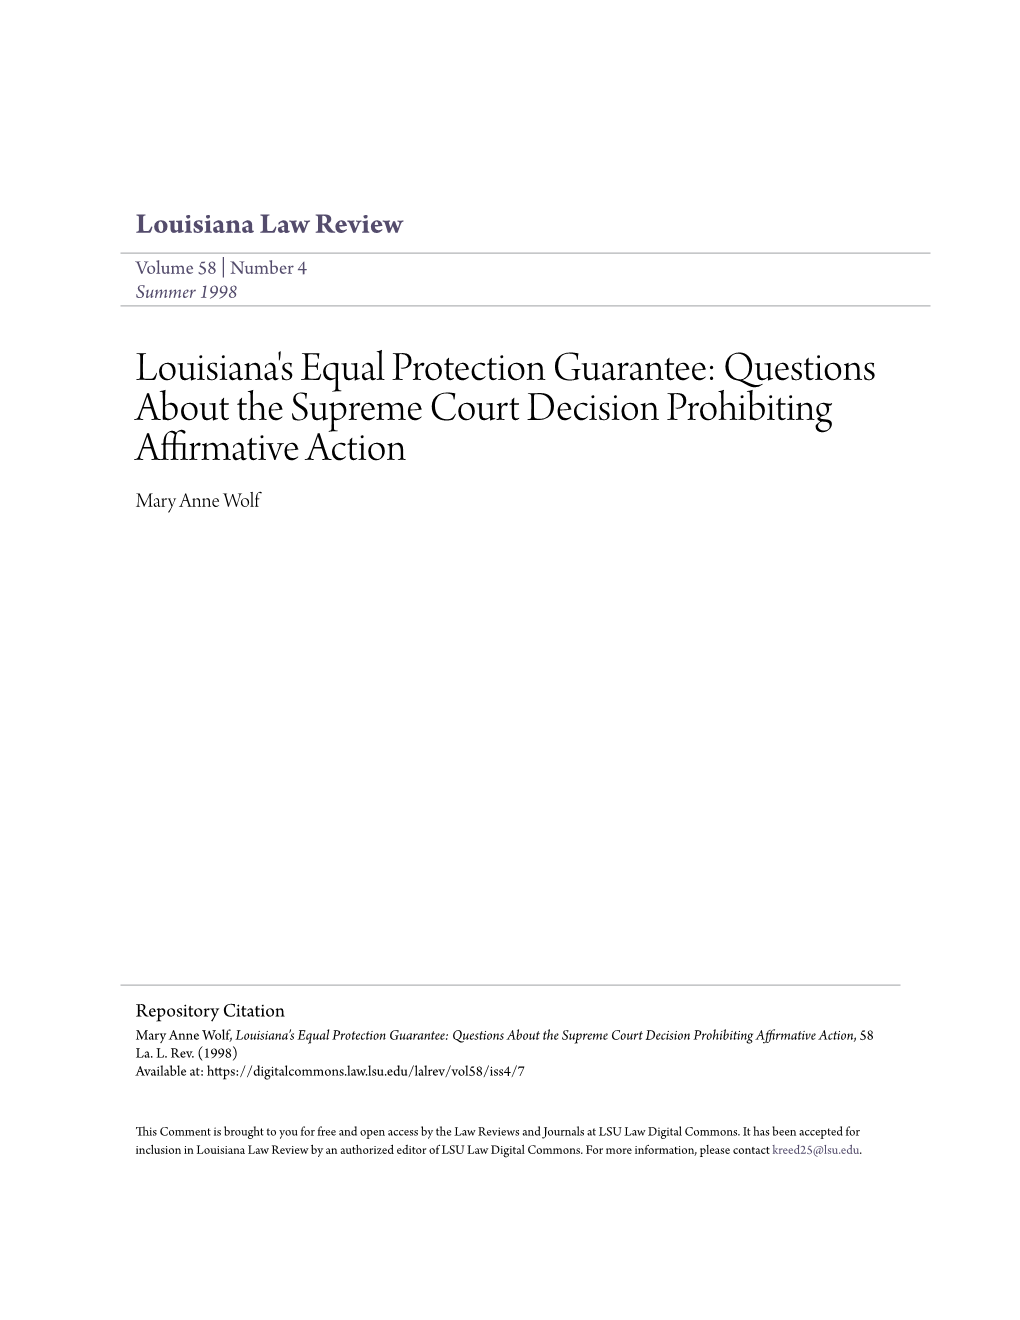 Louisiana's Equal Protection Guarantee: Questions About the Supreme Court Decision Prohibiting Affirmative Action Mary Anne Wolf